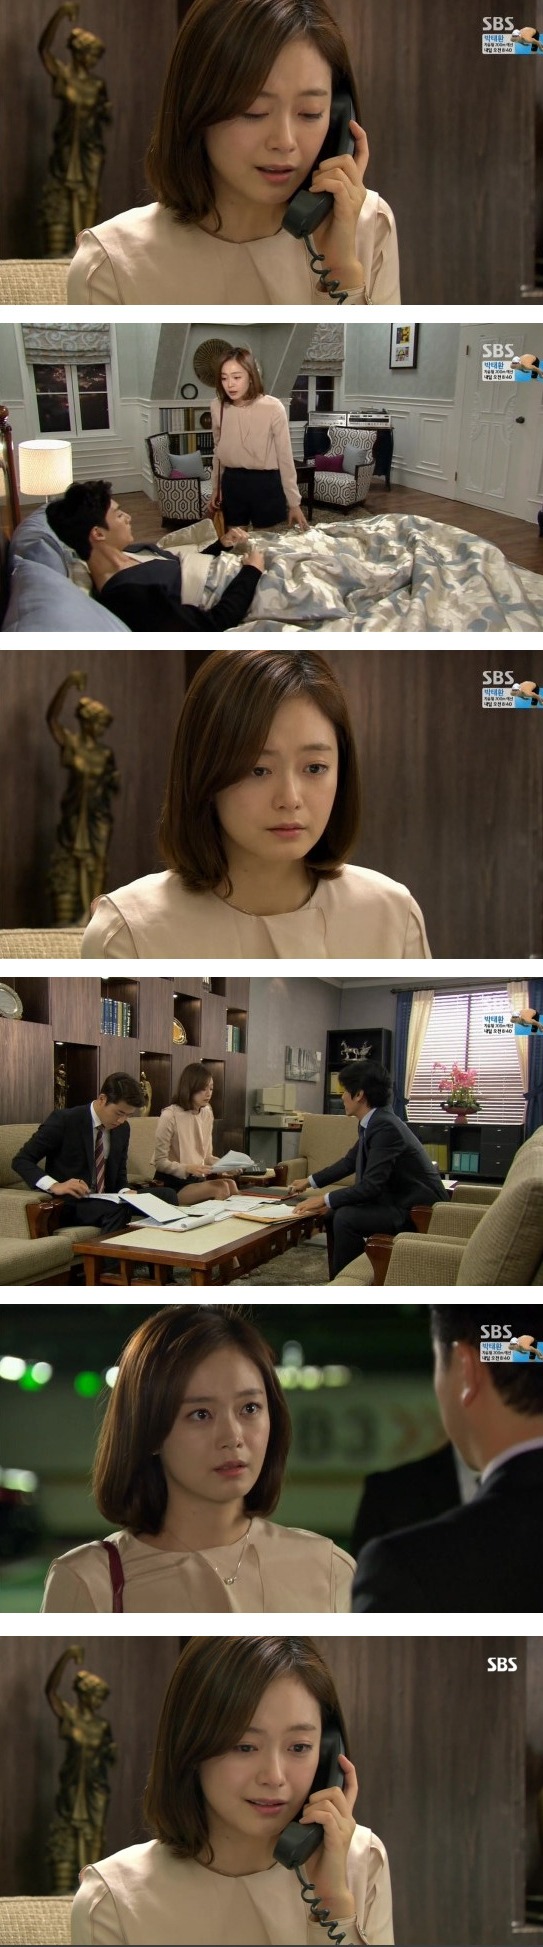 episodes 26 and 27 captures for the Korean drama 'Endless Love'